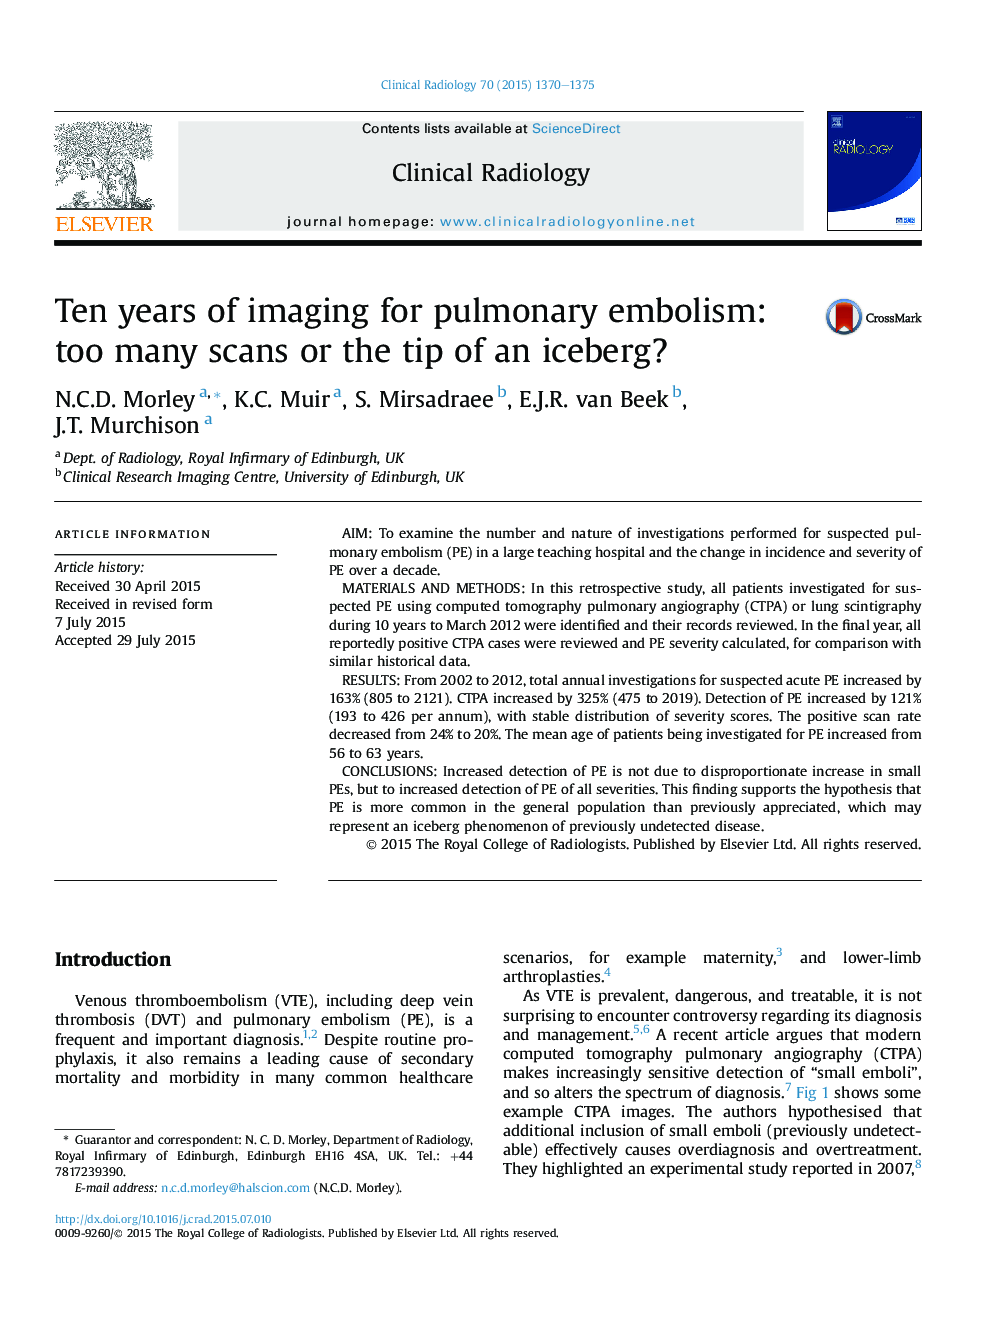 Ten years of imaging for pulmonary embolism: too many scans or the tip of an iceberg?